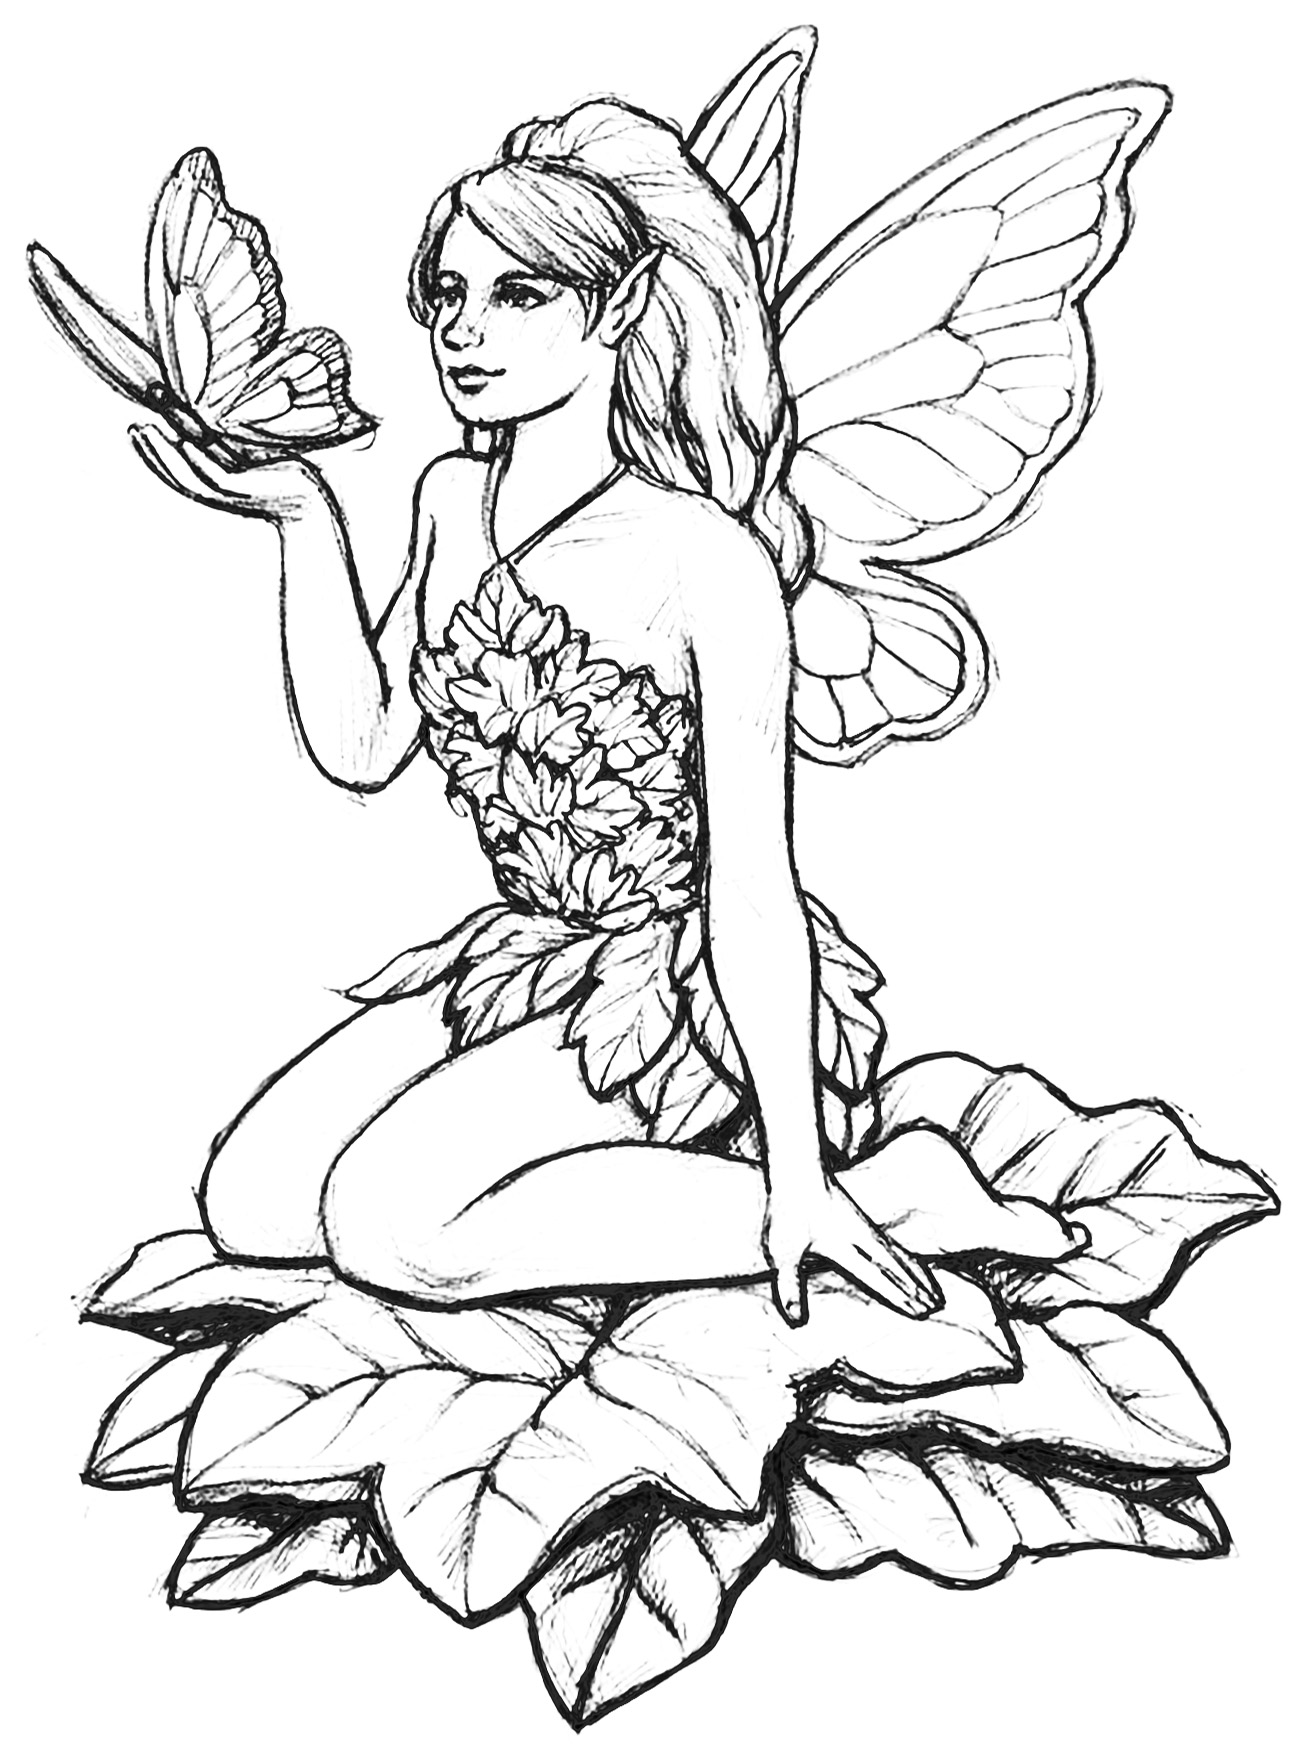 Fairy - Coloring Pages for Adults